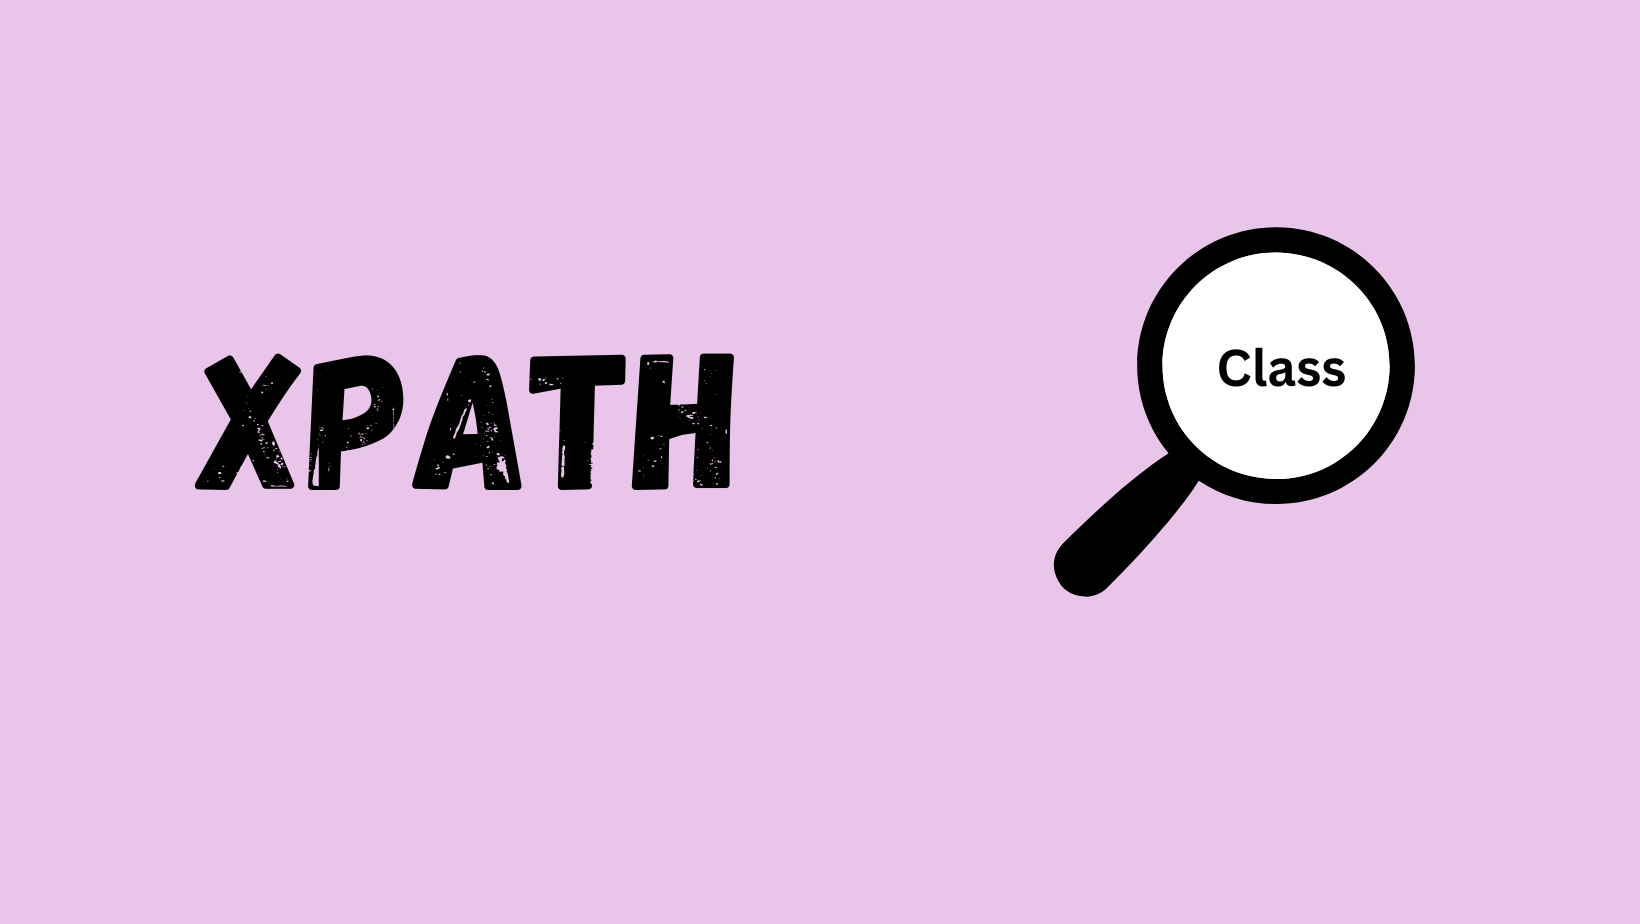 how to select elements by text in xpath